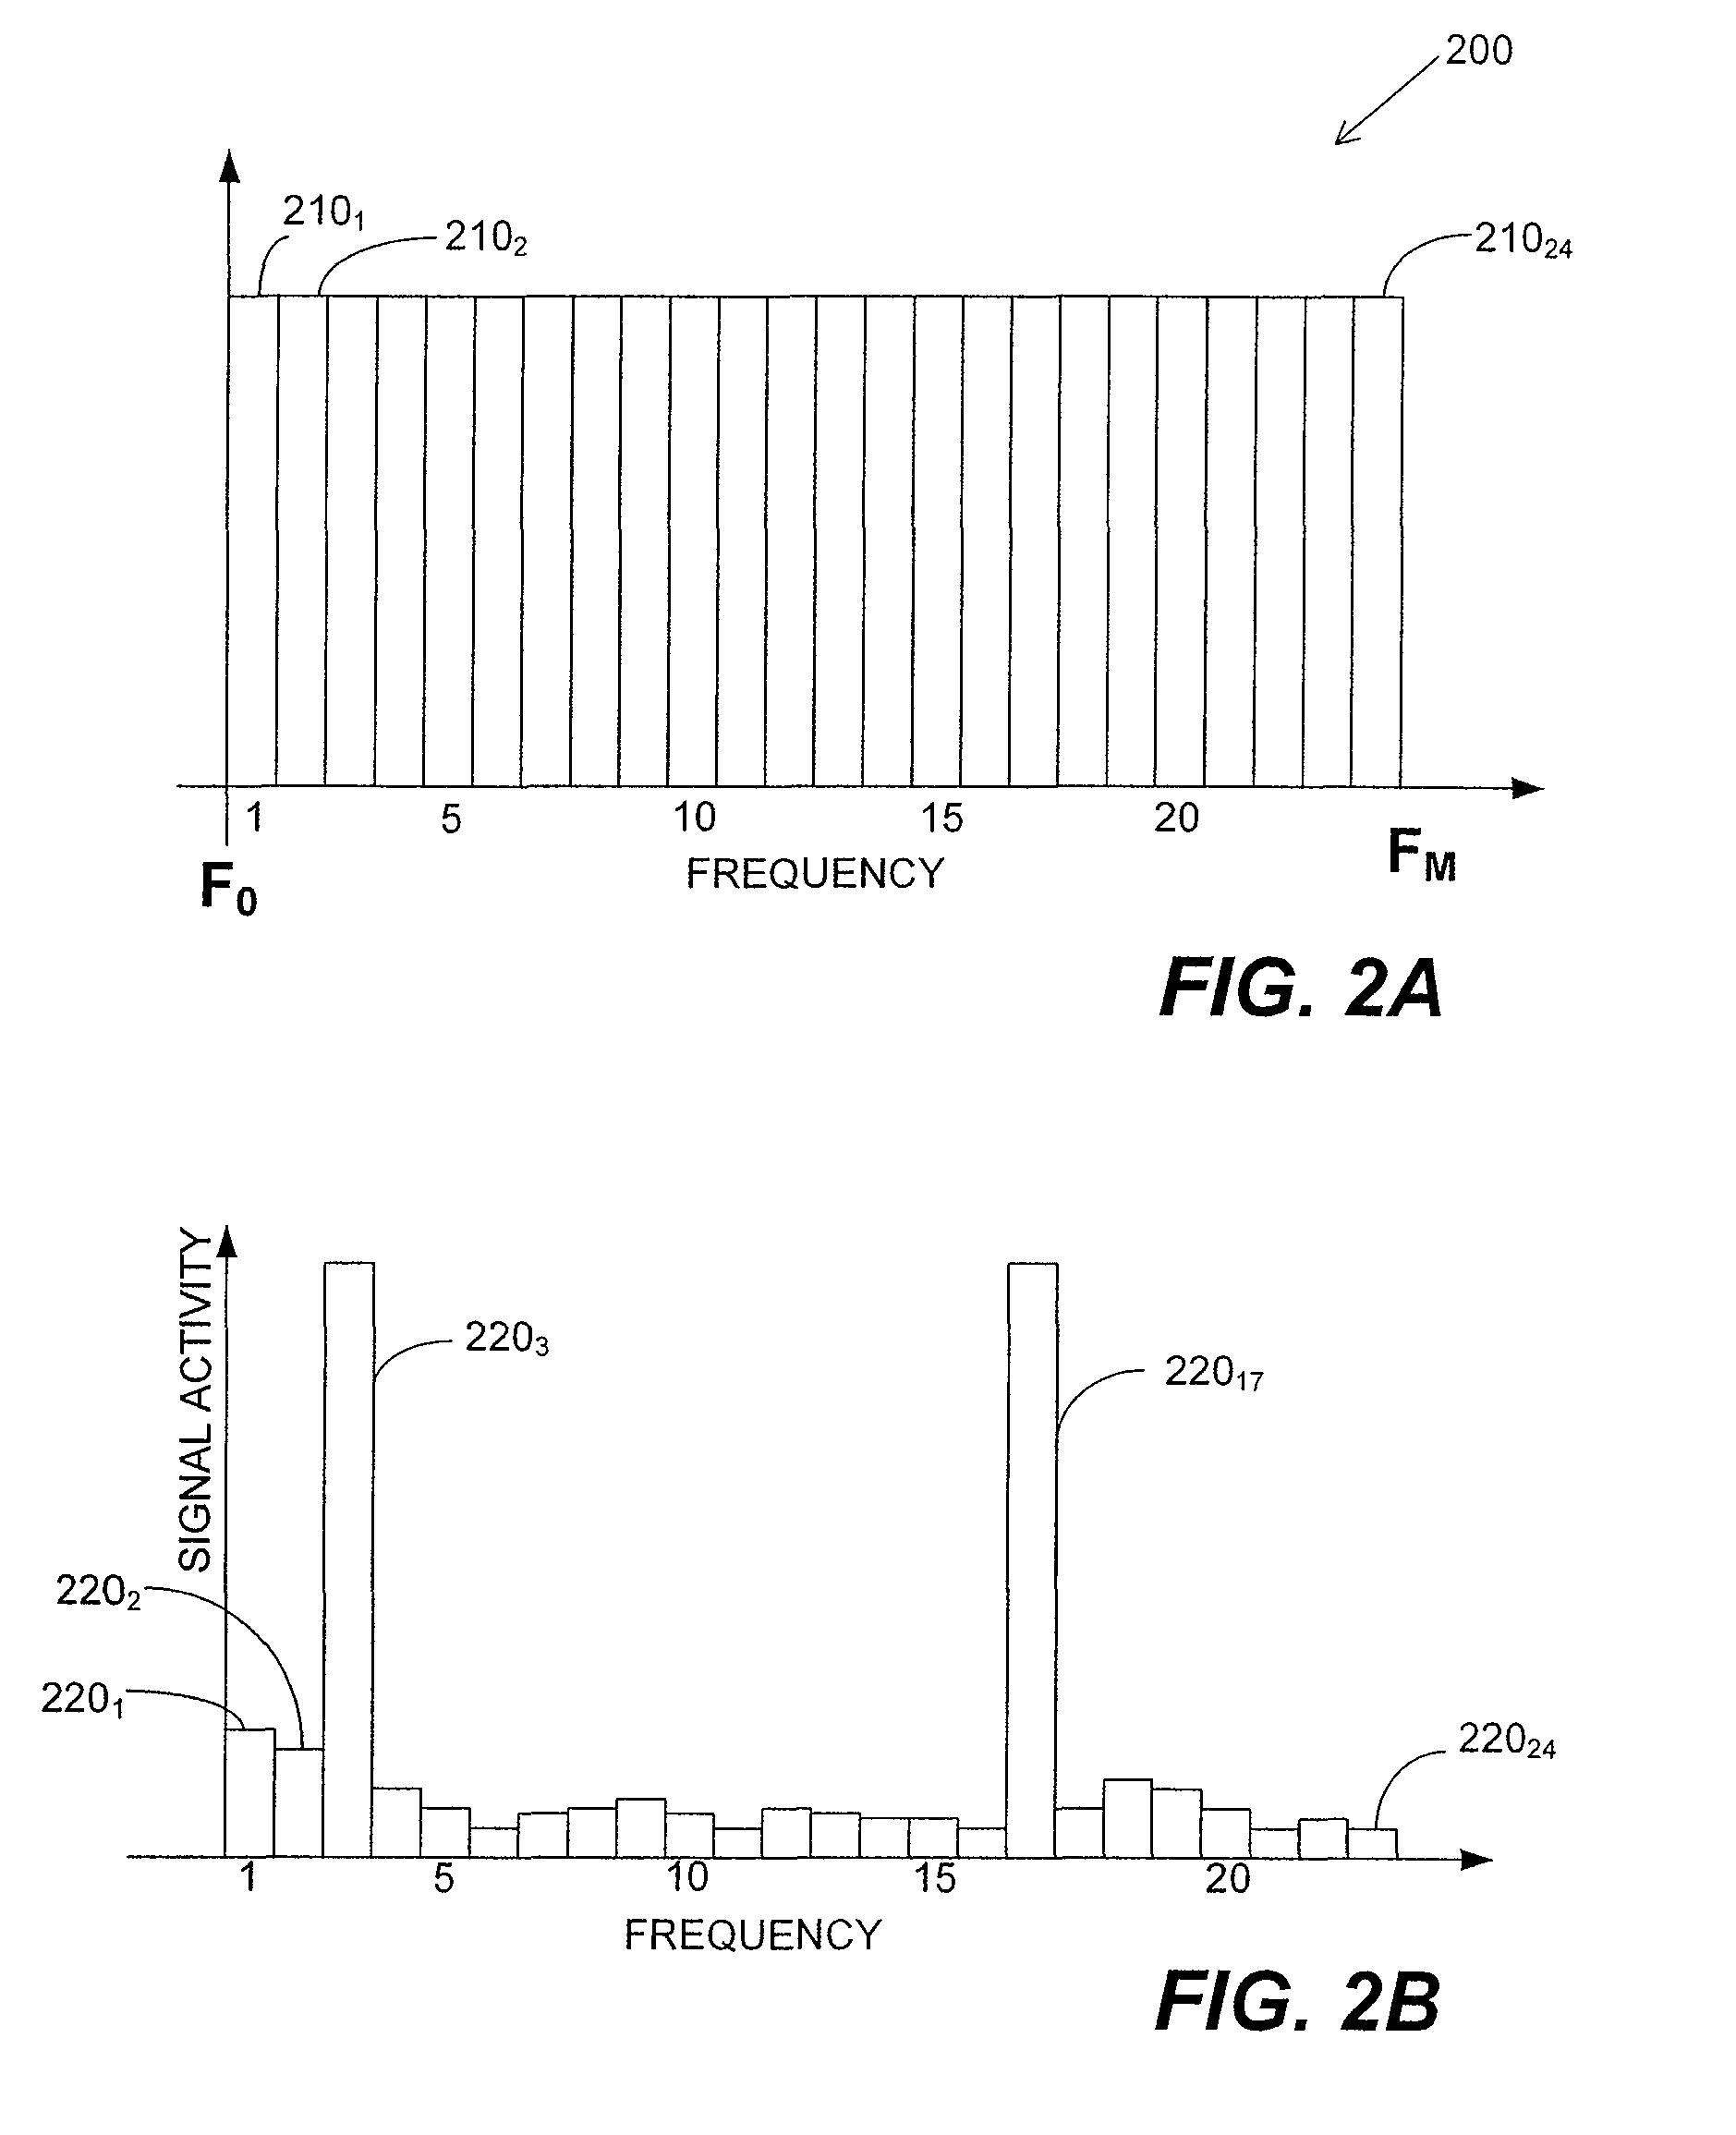 Orthogonal frequency division multiple access with carrier sense